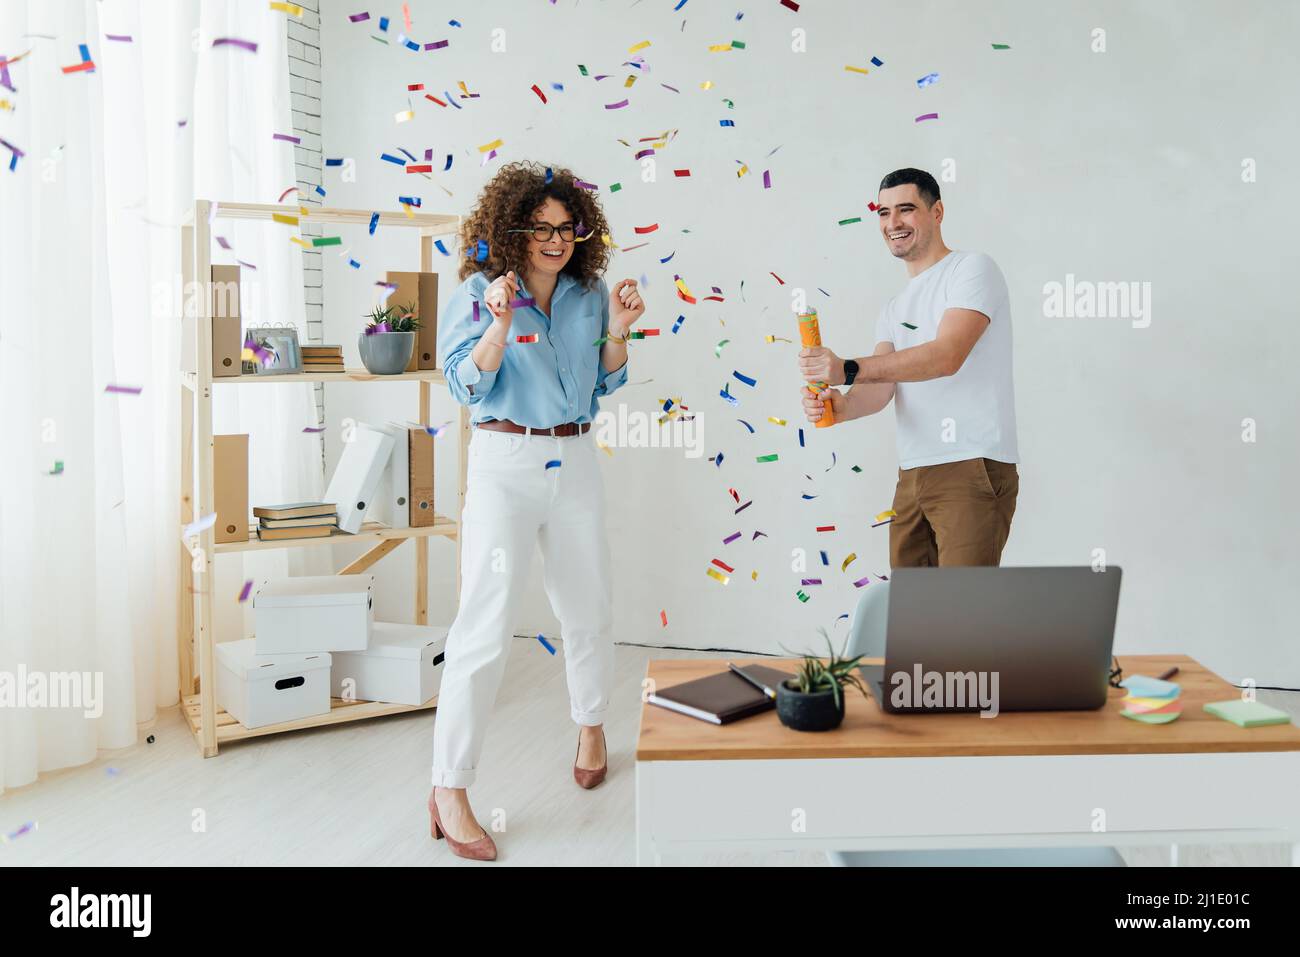 Two colleagues celebrating birthday or starting new business in office. Confetti in the air Stock Photo